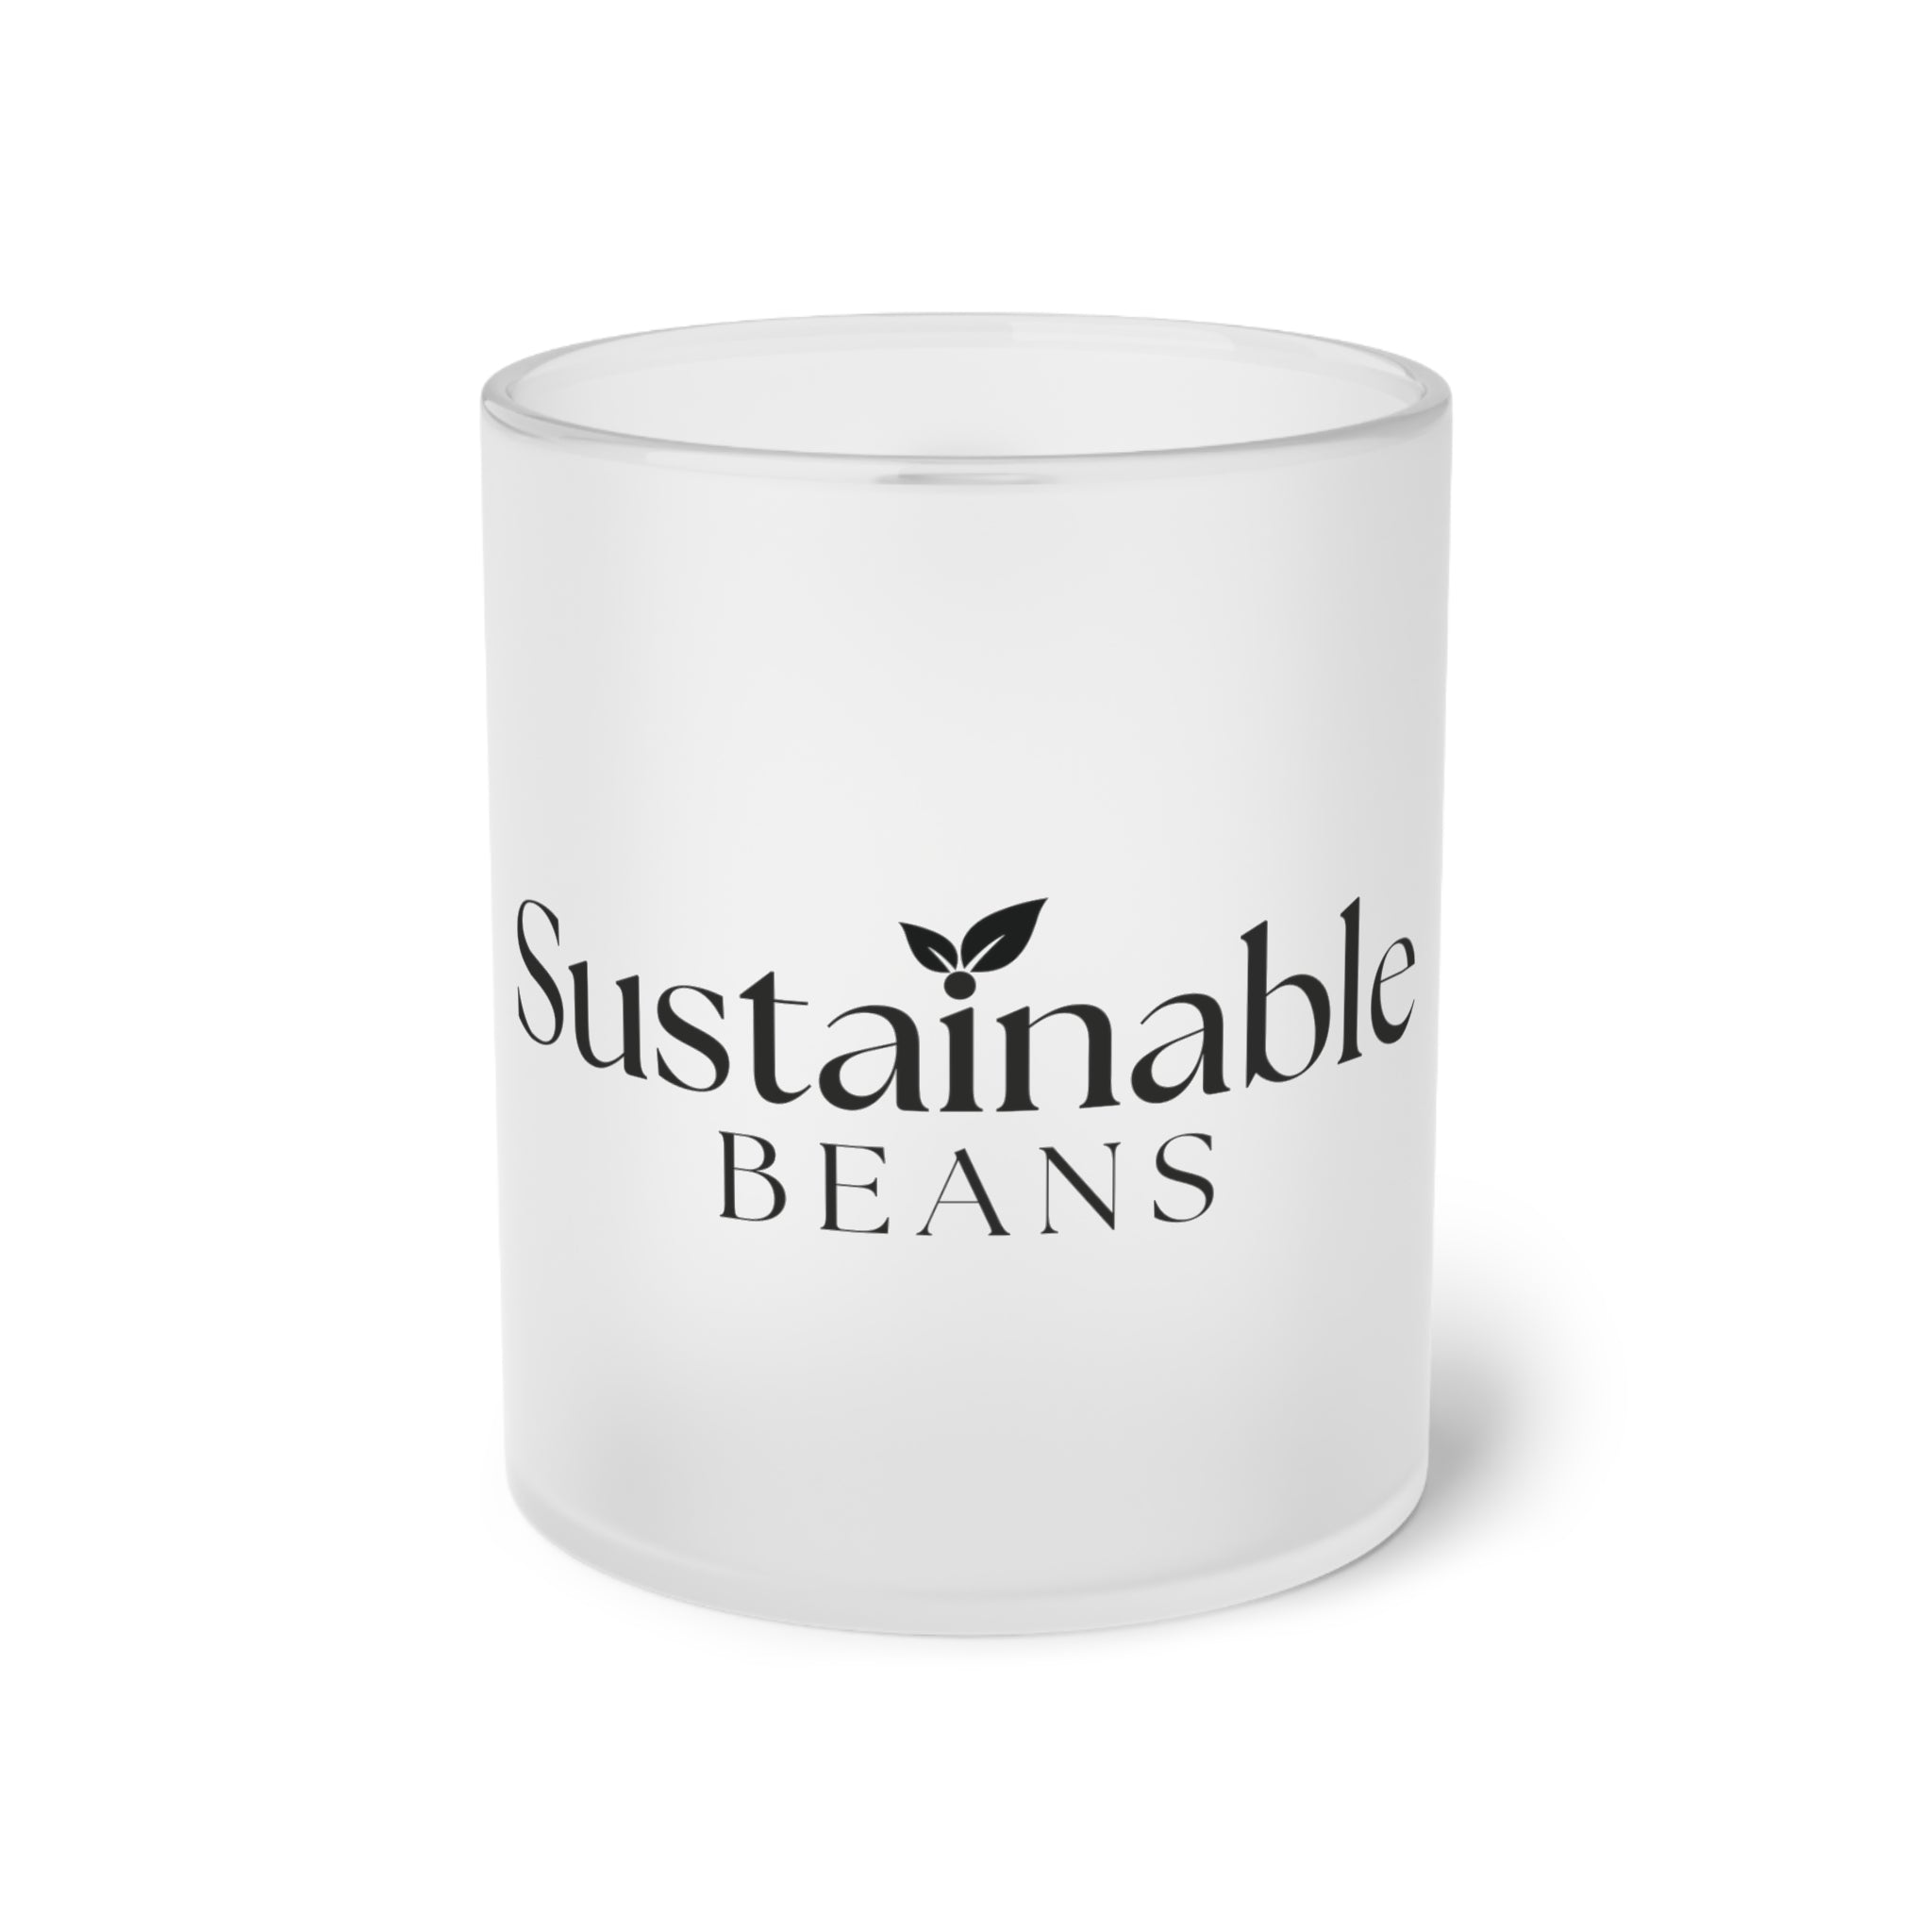 Contemporary frosted 11oz Mug - Sustainable Beans